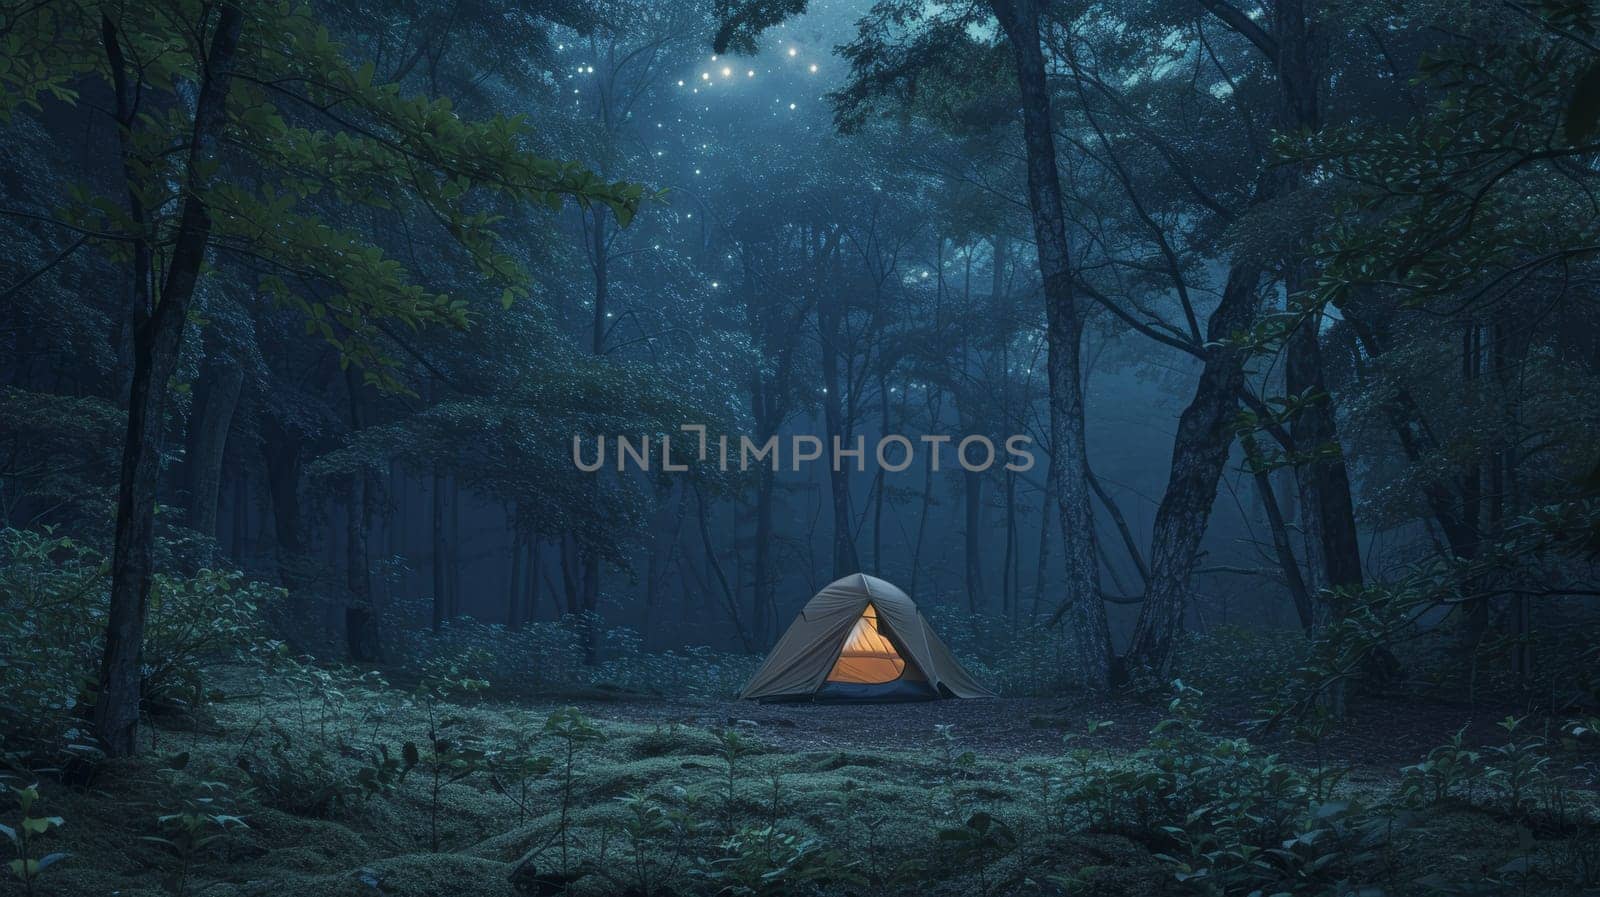 Illuminated tent under a starry sky amidst towering forest trees, capturing the tranquil essence of wilderness camping. by sfinks